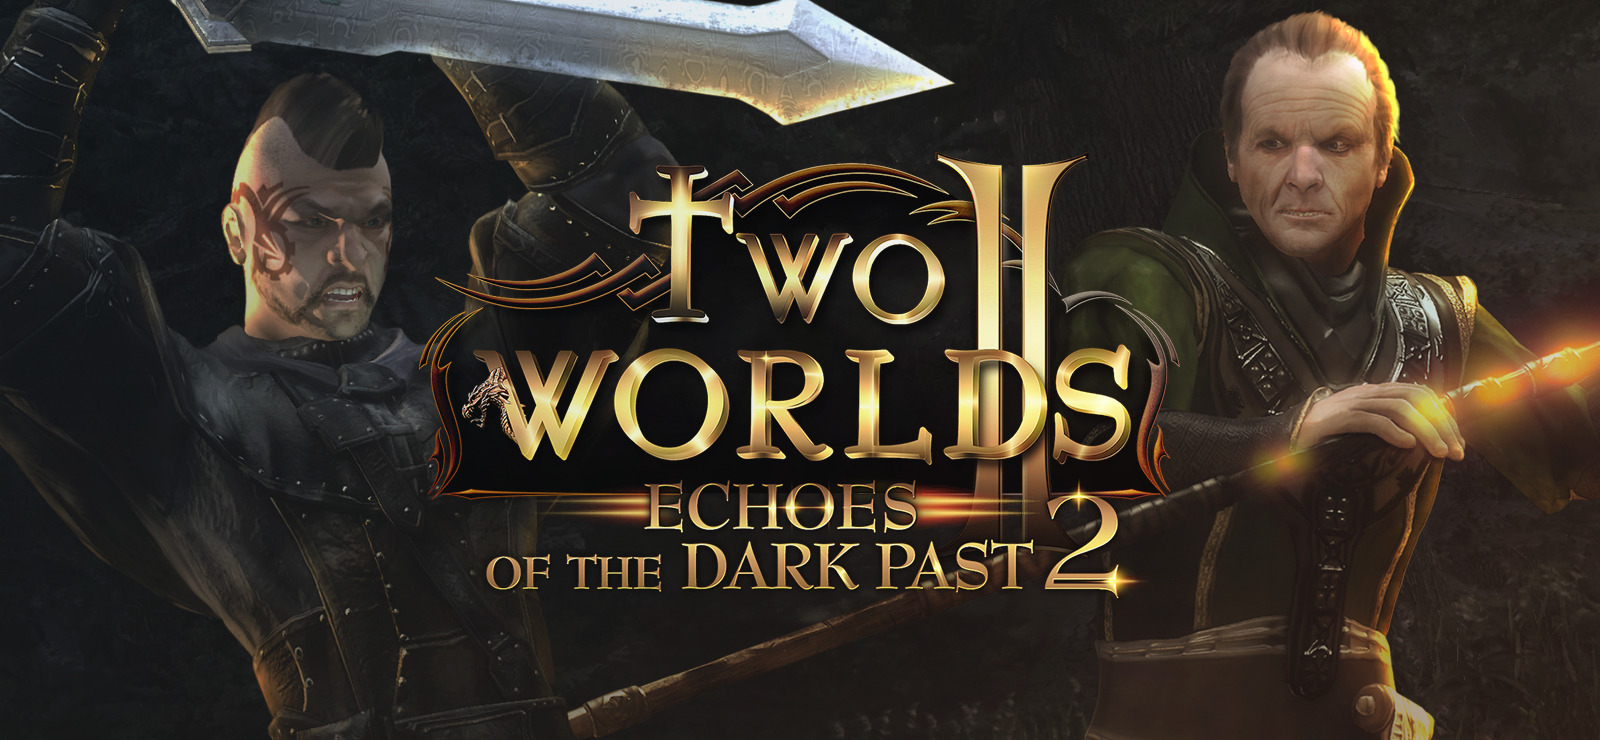 The world of the past be. Dark past игра. Two_Worlds_II_2.0.6_(23167)_win_GOG. Echoes of the end.